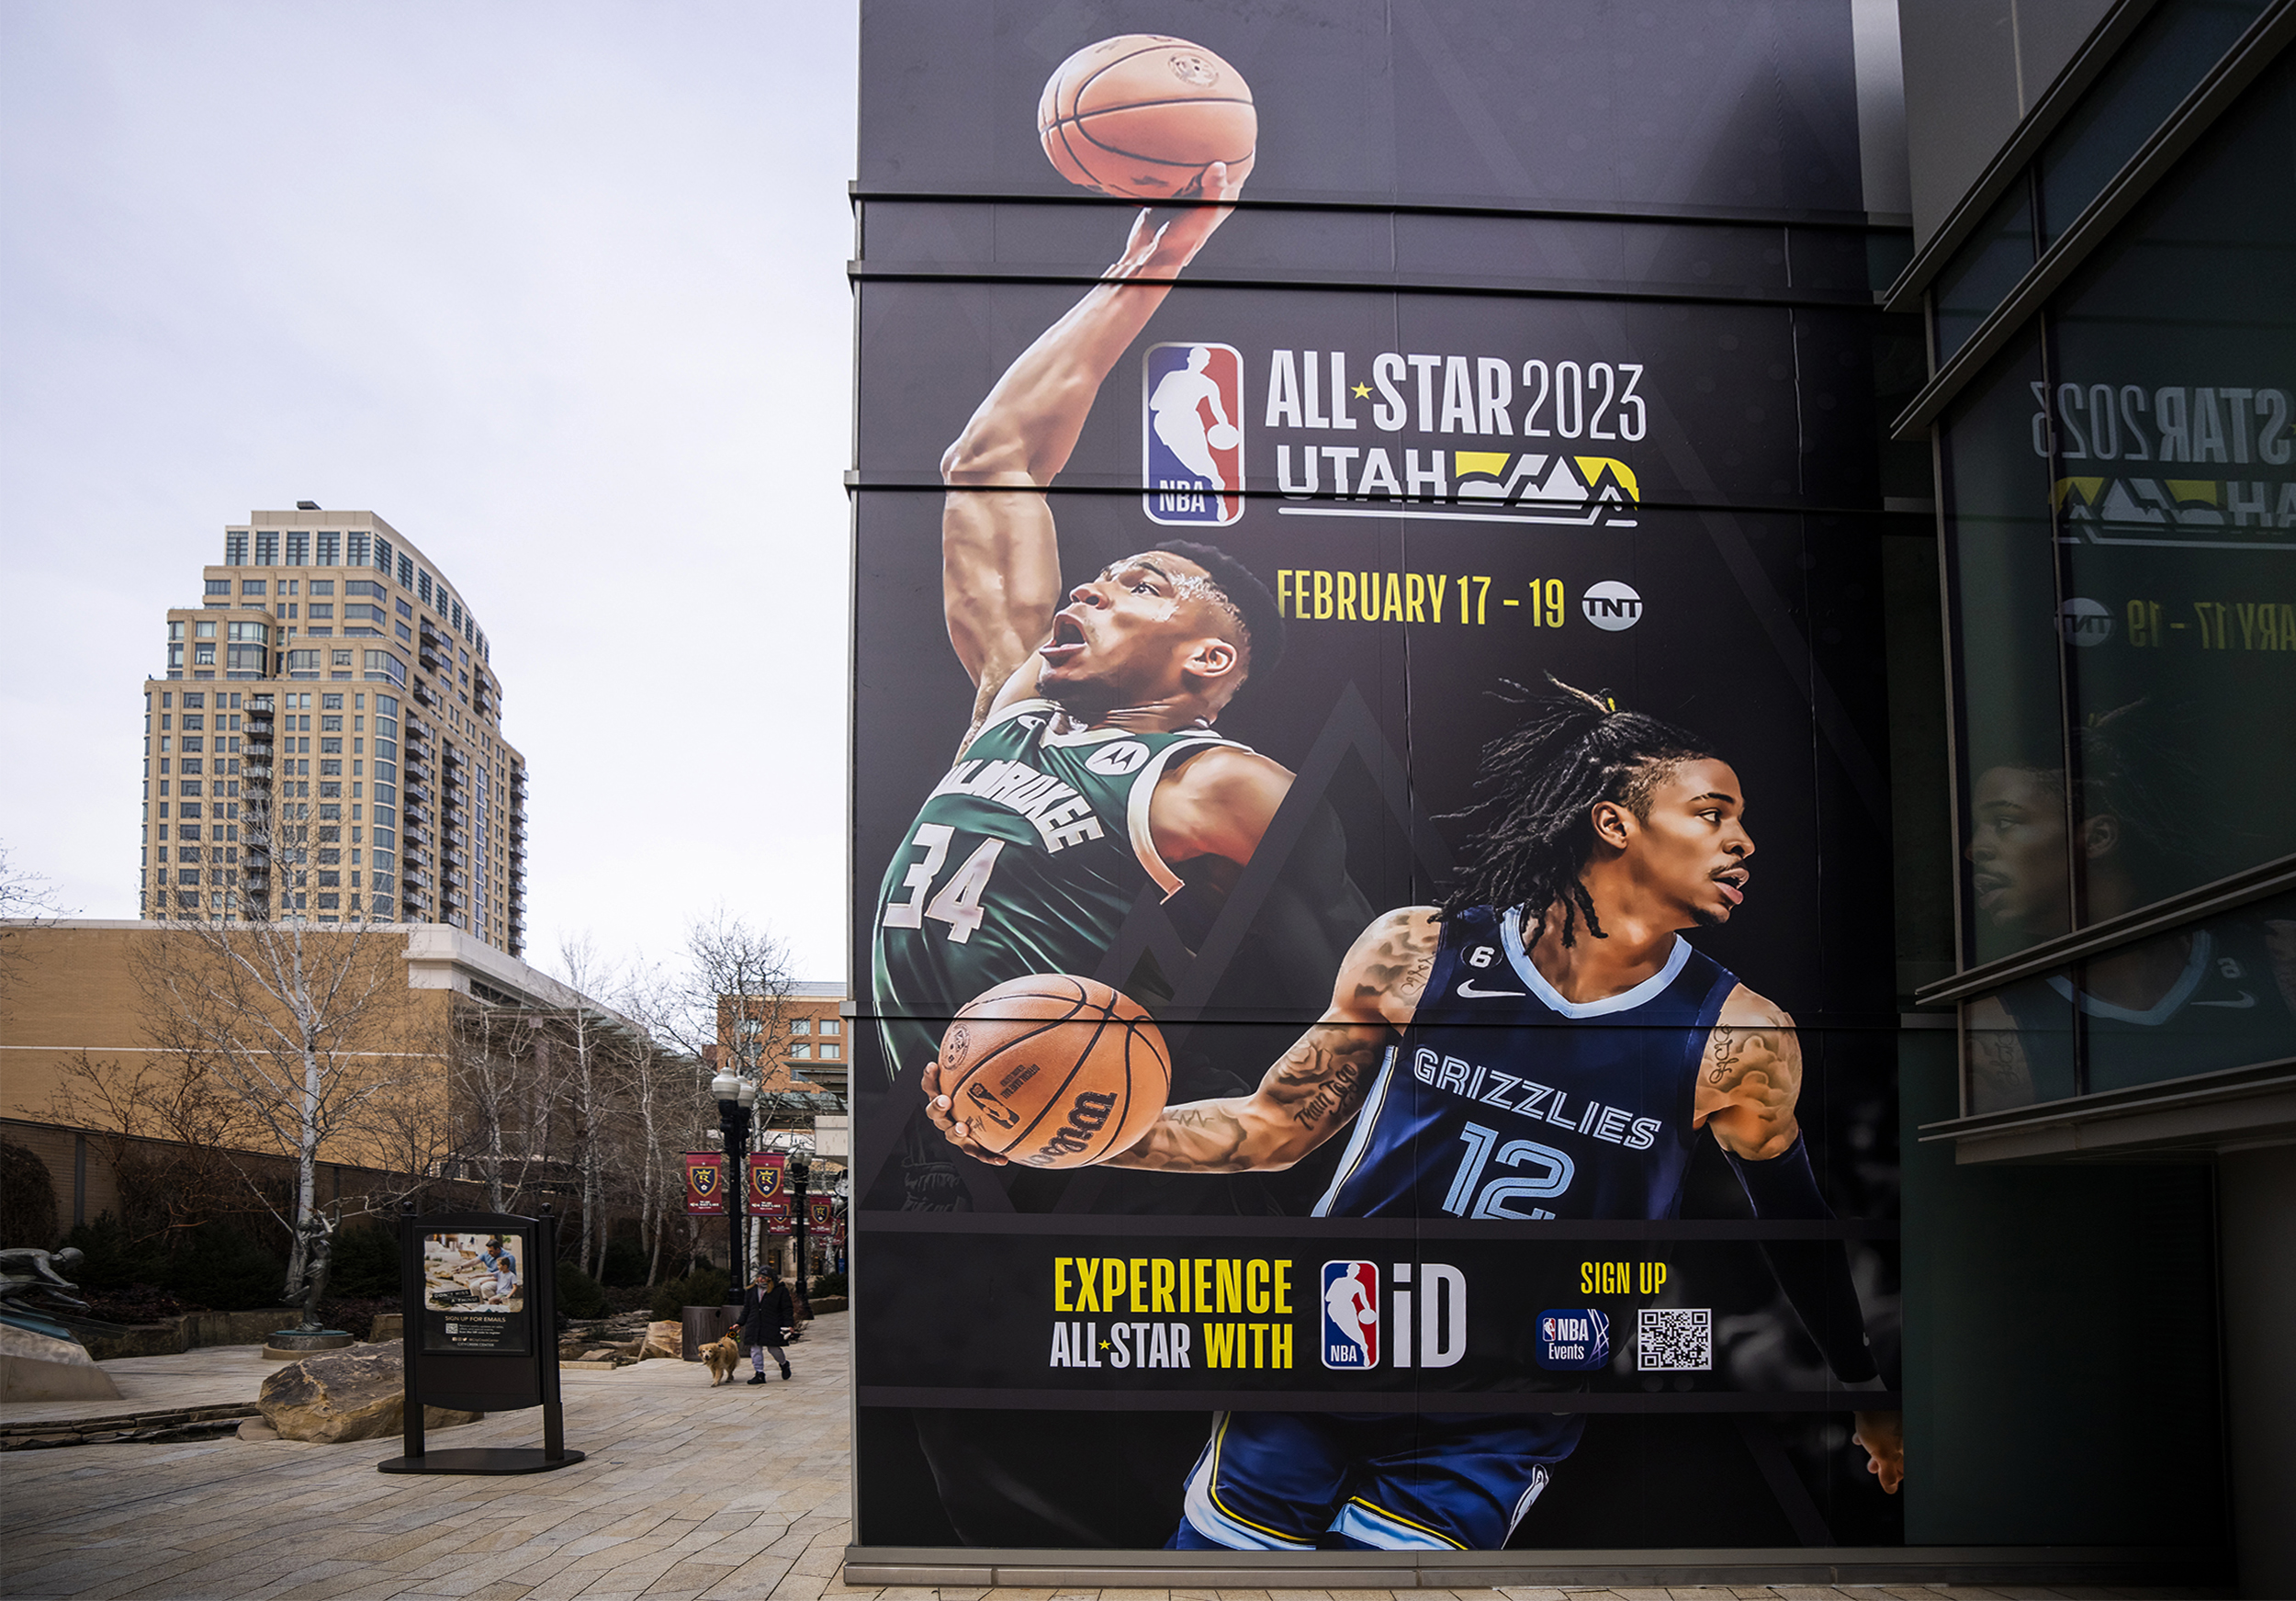 2023 NBA All-Star Game: How it ended up in Salt Lake City